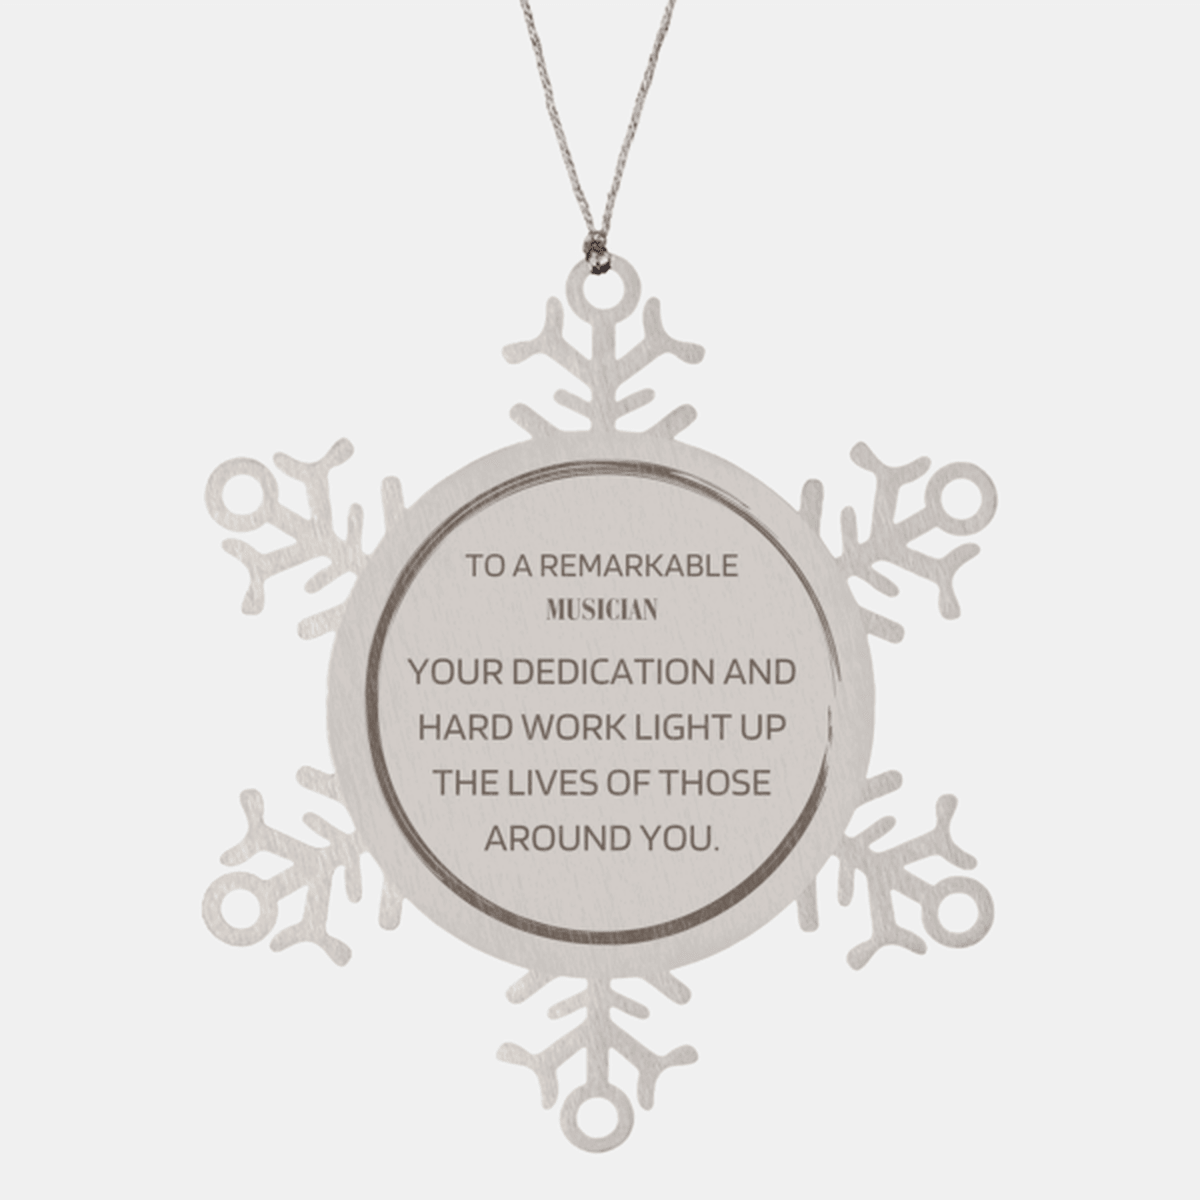 Remarkable Musician Gifts, Your dedication and hard work, Inspirational Birthday Christmas Unique Snowflake Ornament For Musician, Coworkers, Men, Women, Friends - Mallard Moon Gift Shop